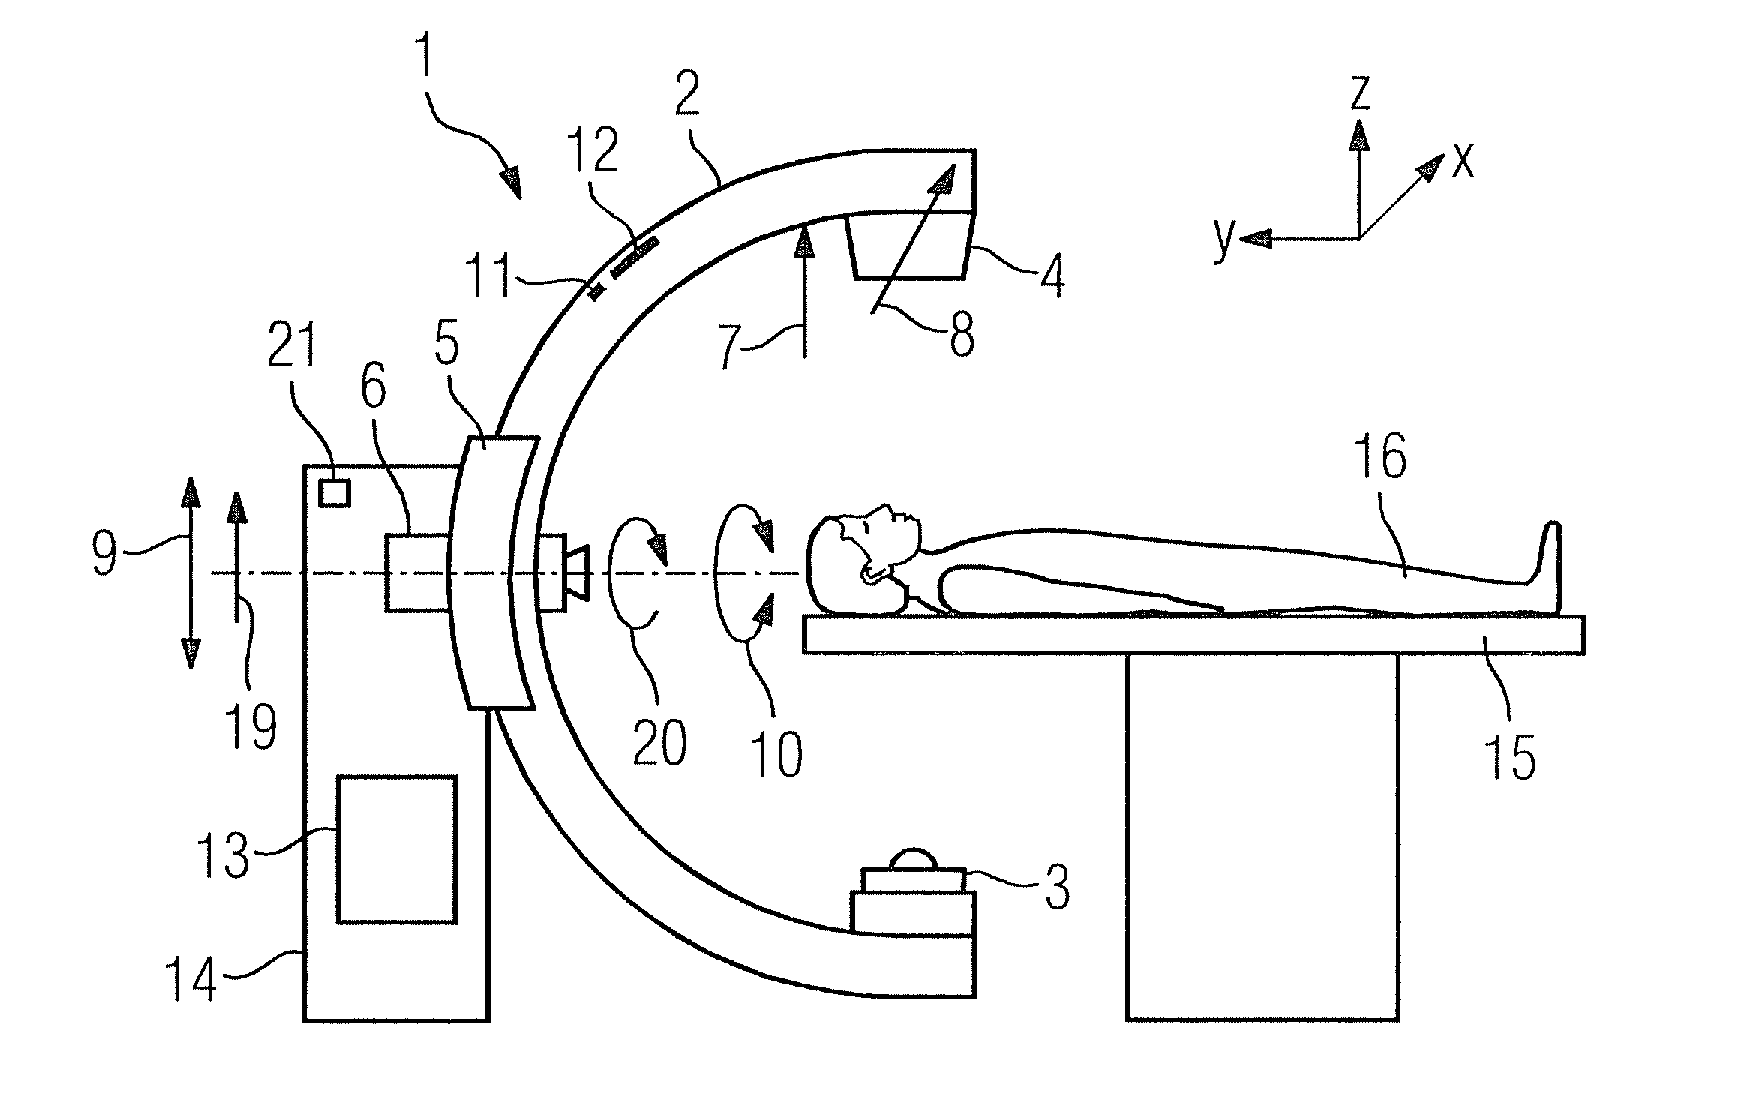 X-ray apparatus and method for controlling the movement of an x-ray apparatus